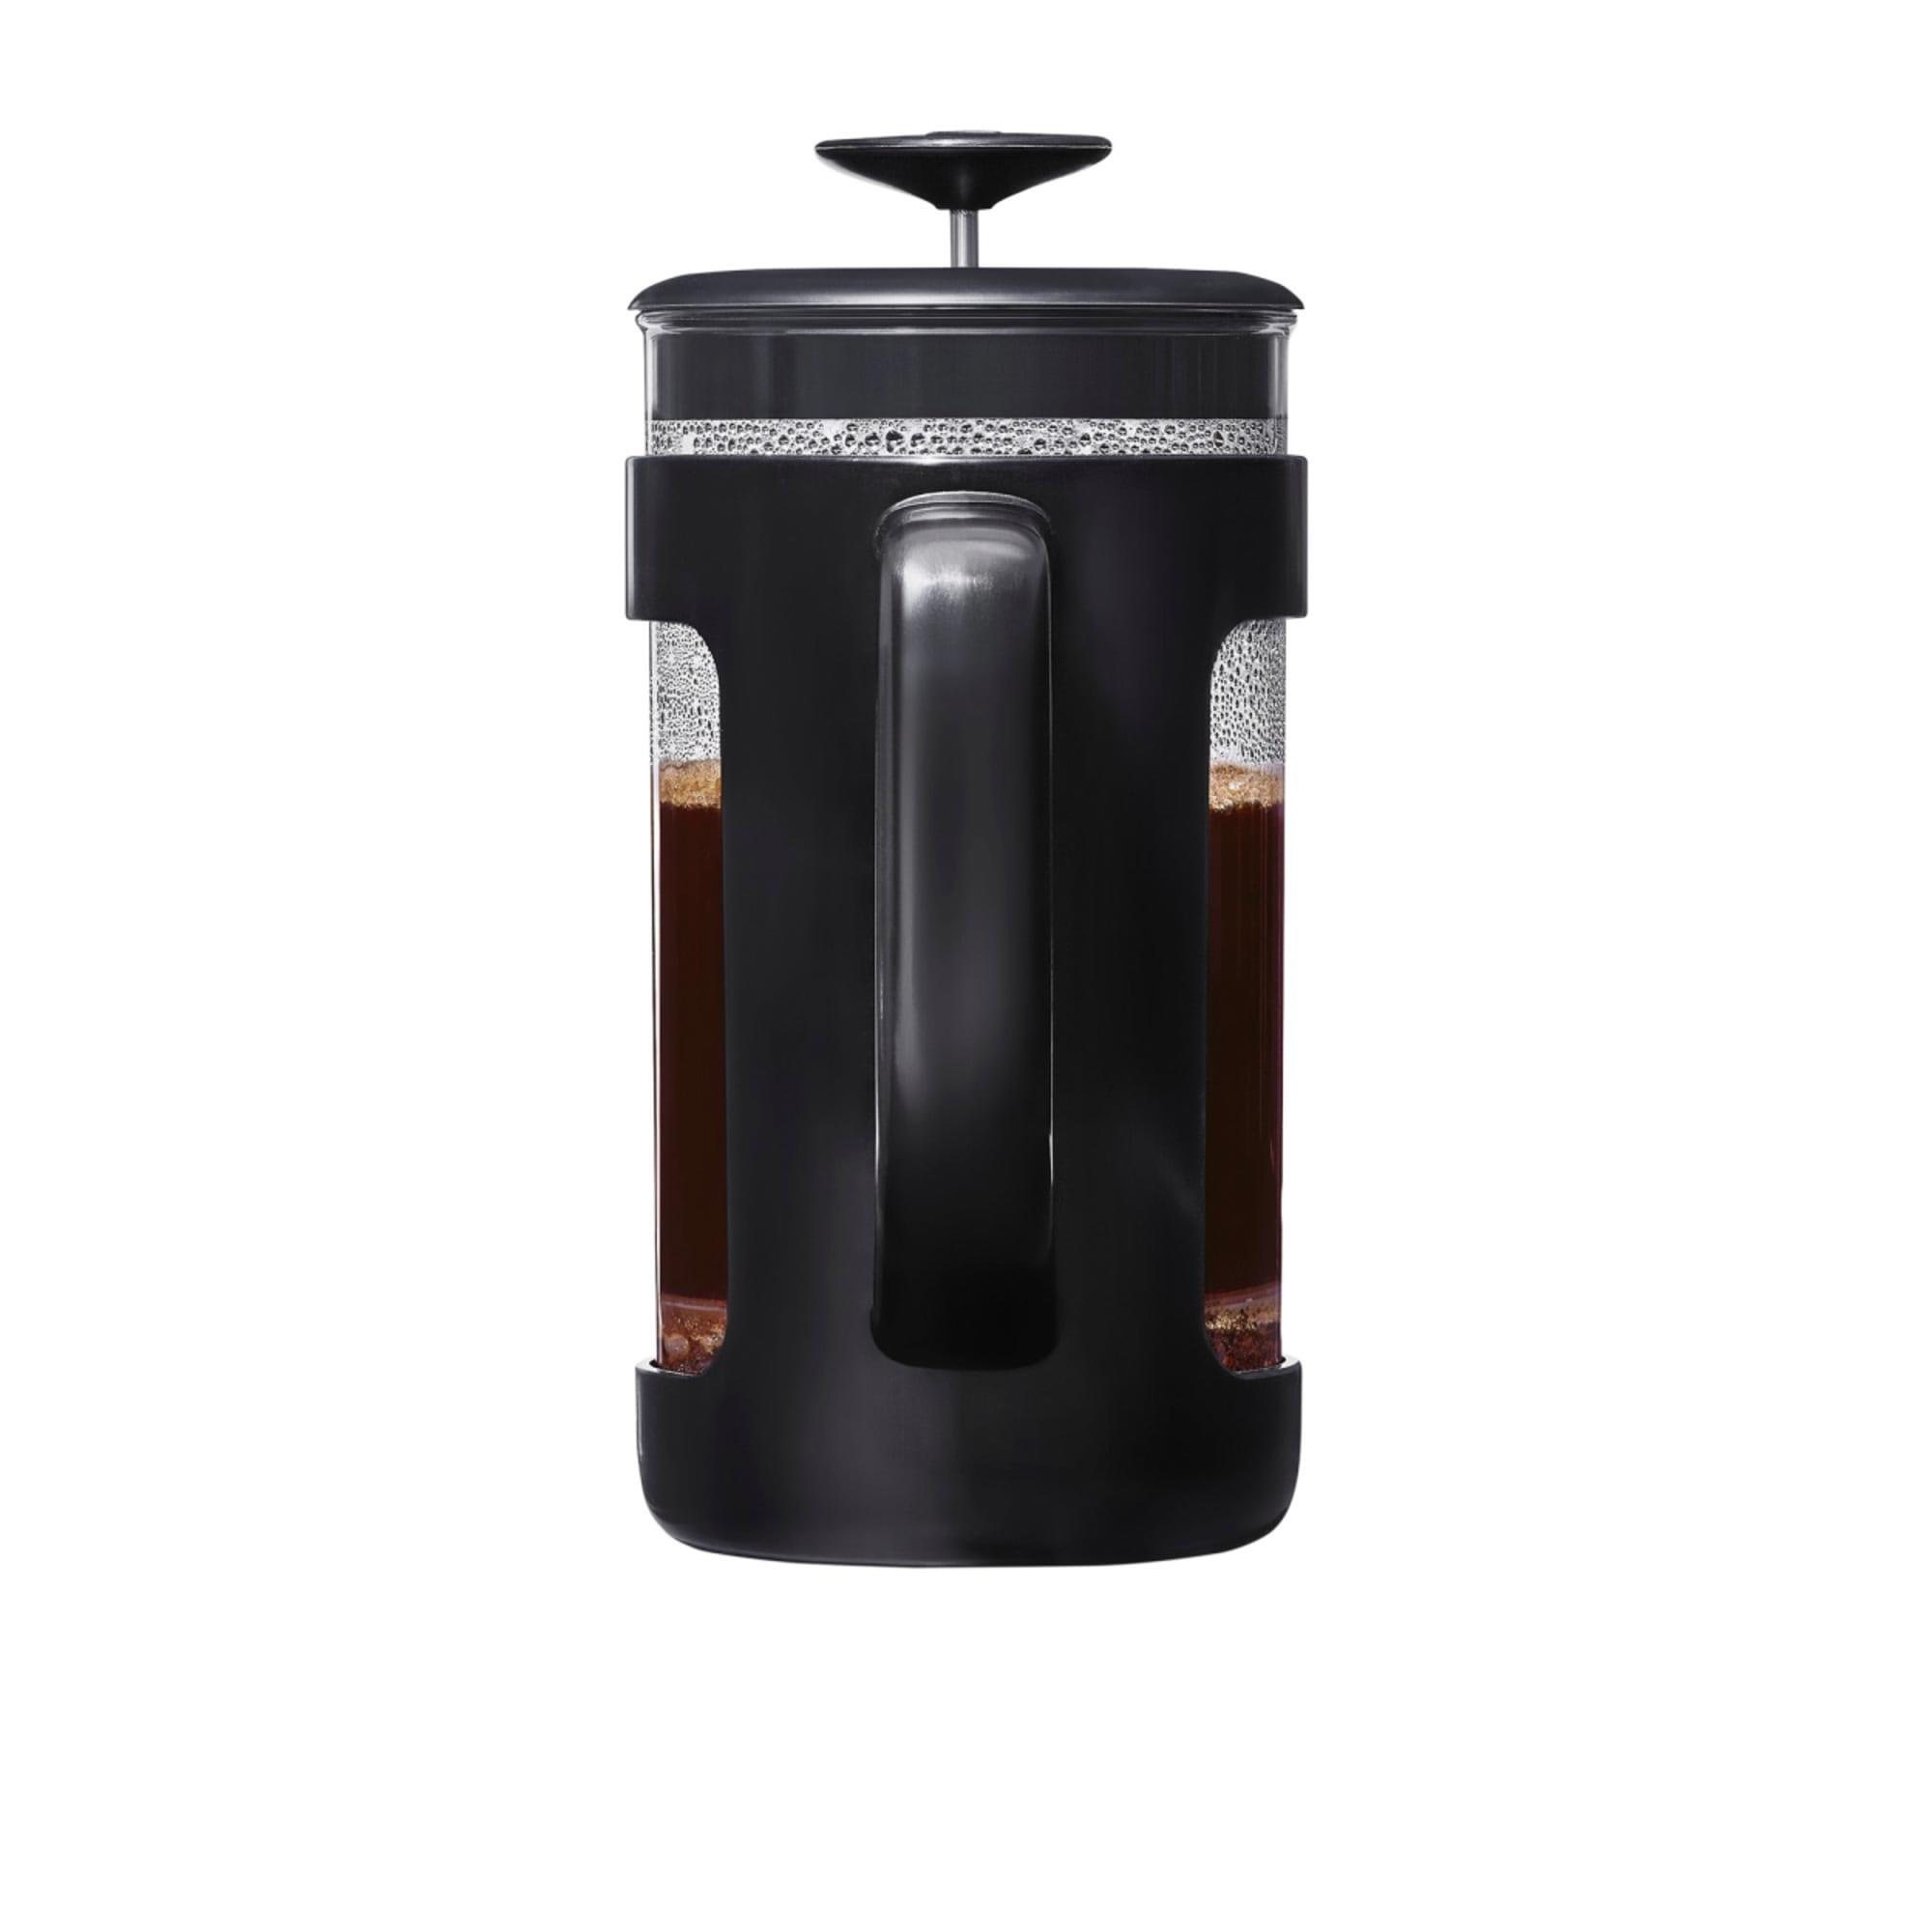 OXO Good Grips Venture French Press 8 Cup Image 3